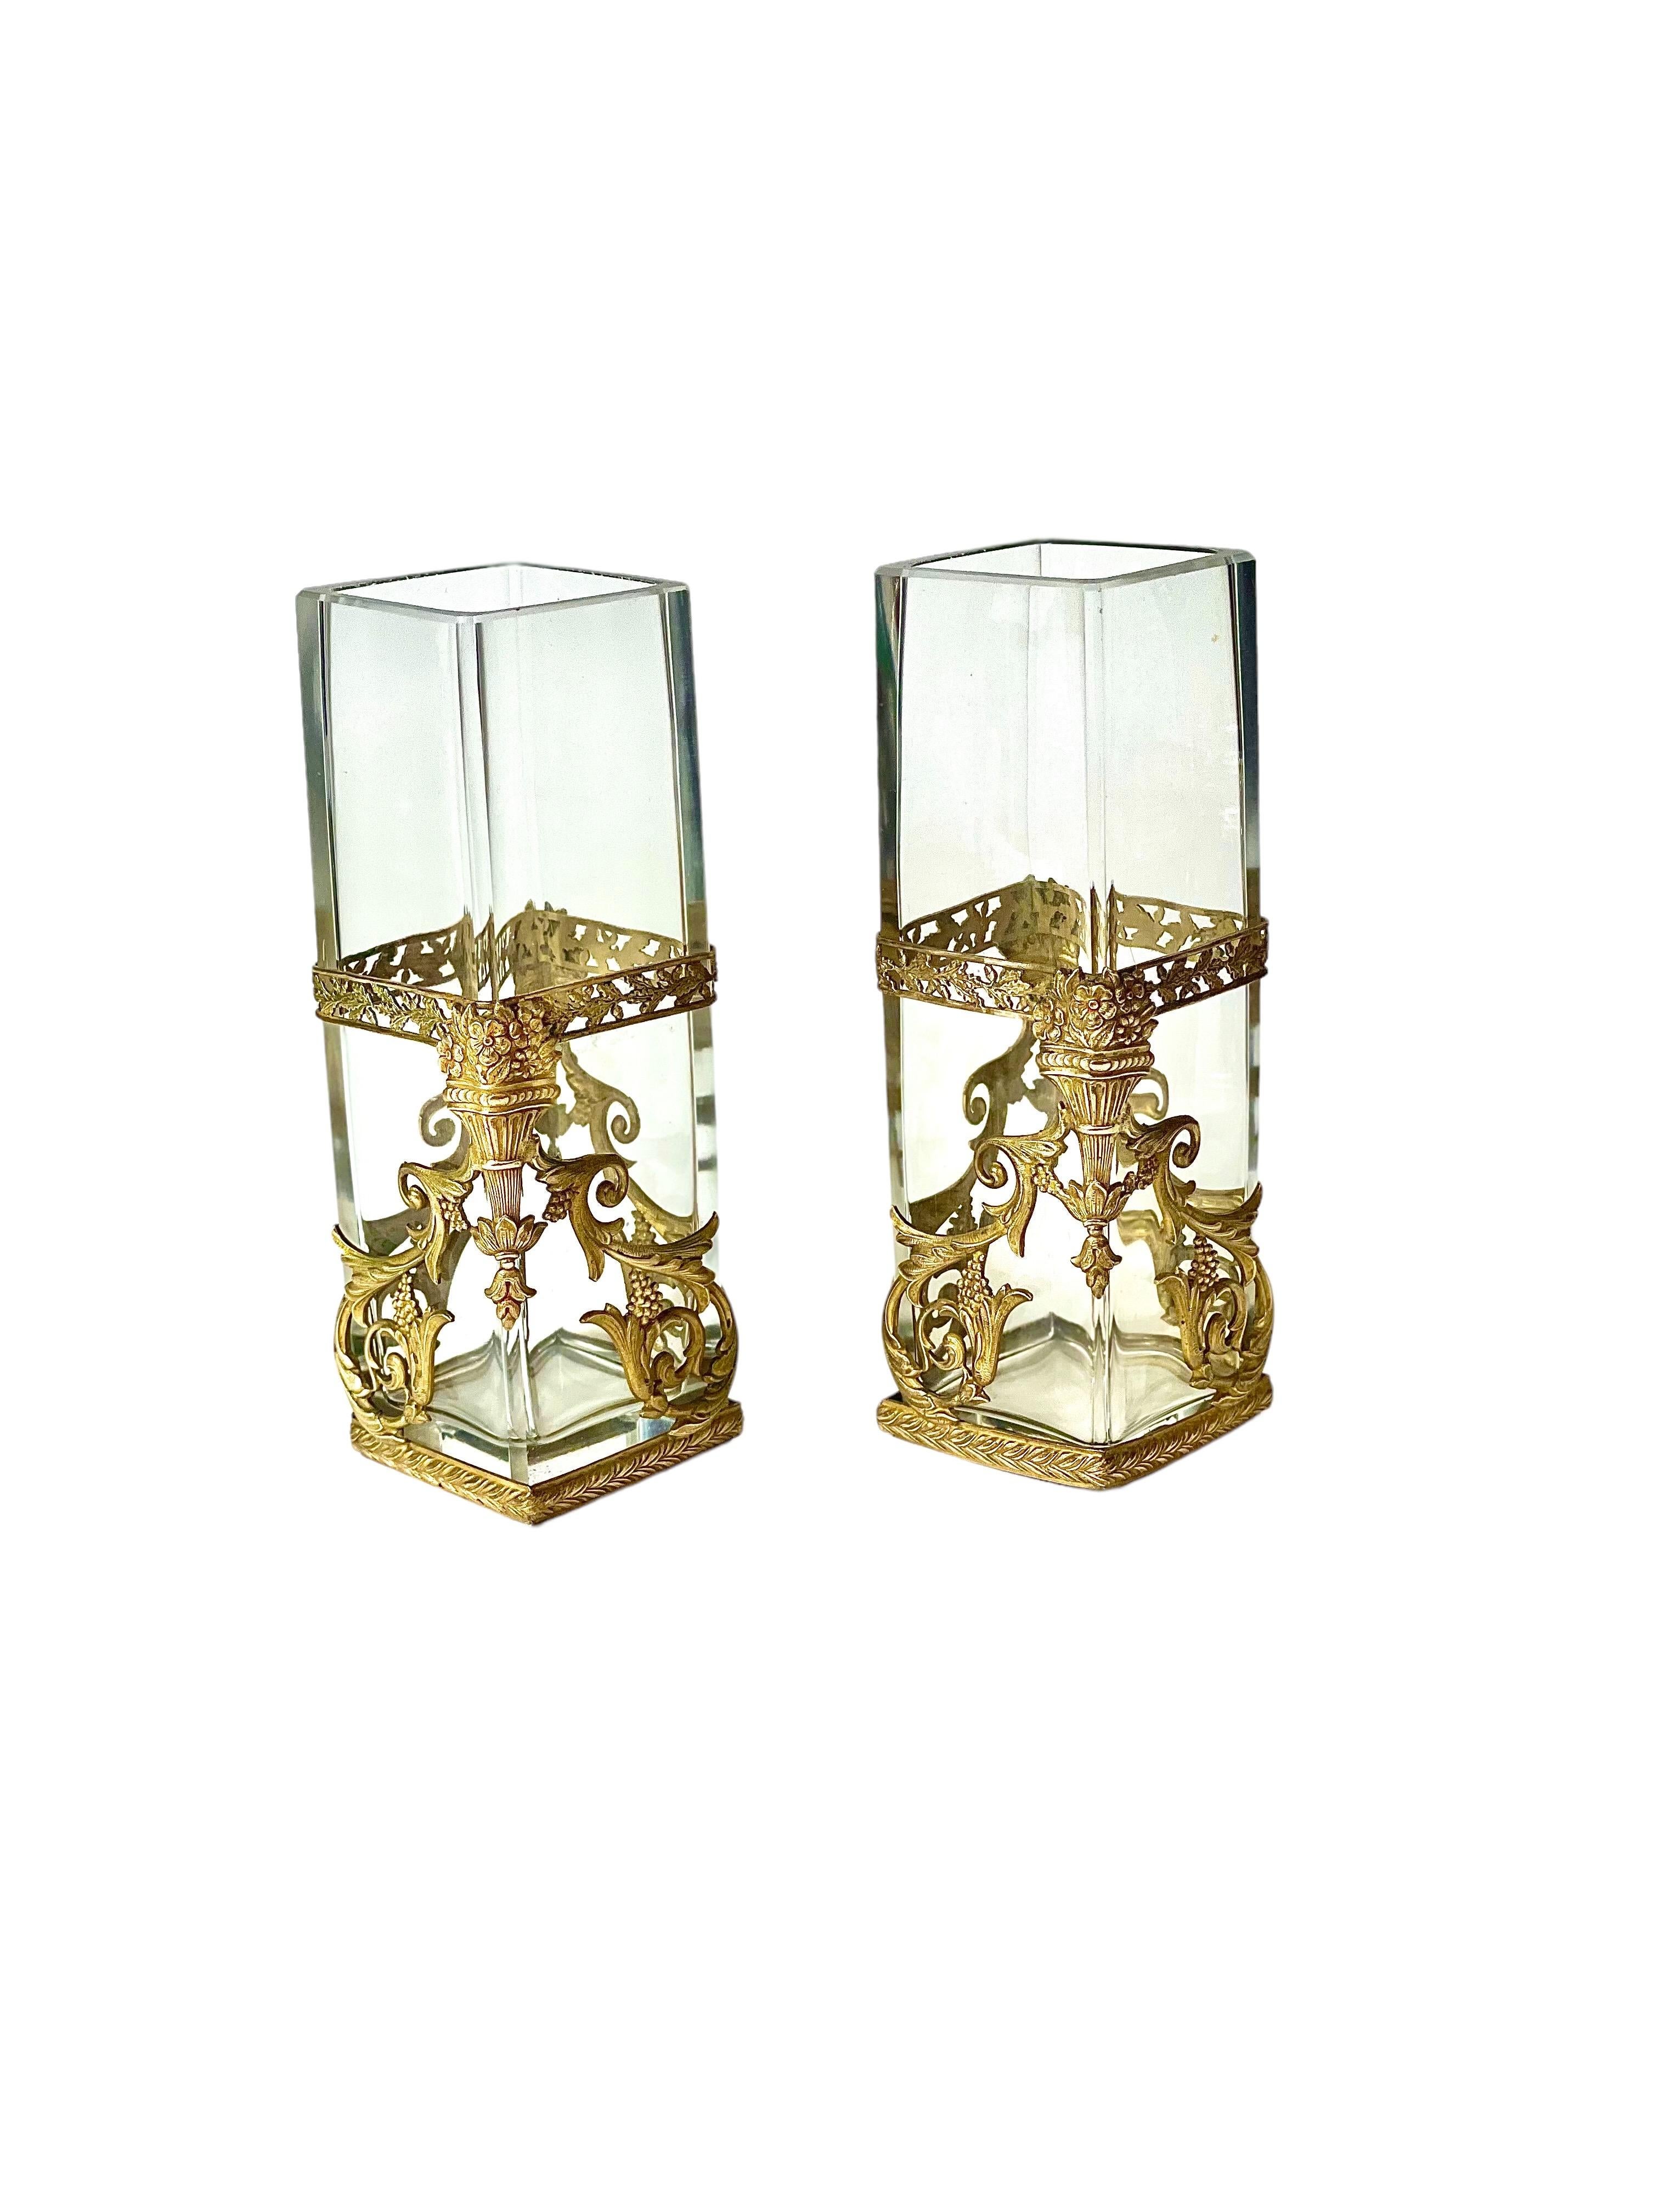 A very pretty pair of quadrangular-shaped glass vases, decorated with exceptionally detailed gilt-brass ormolu mounts in the Louis XVI style. These vases date from around 1900 and are in excellent condition.